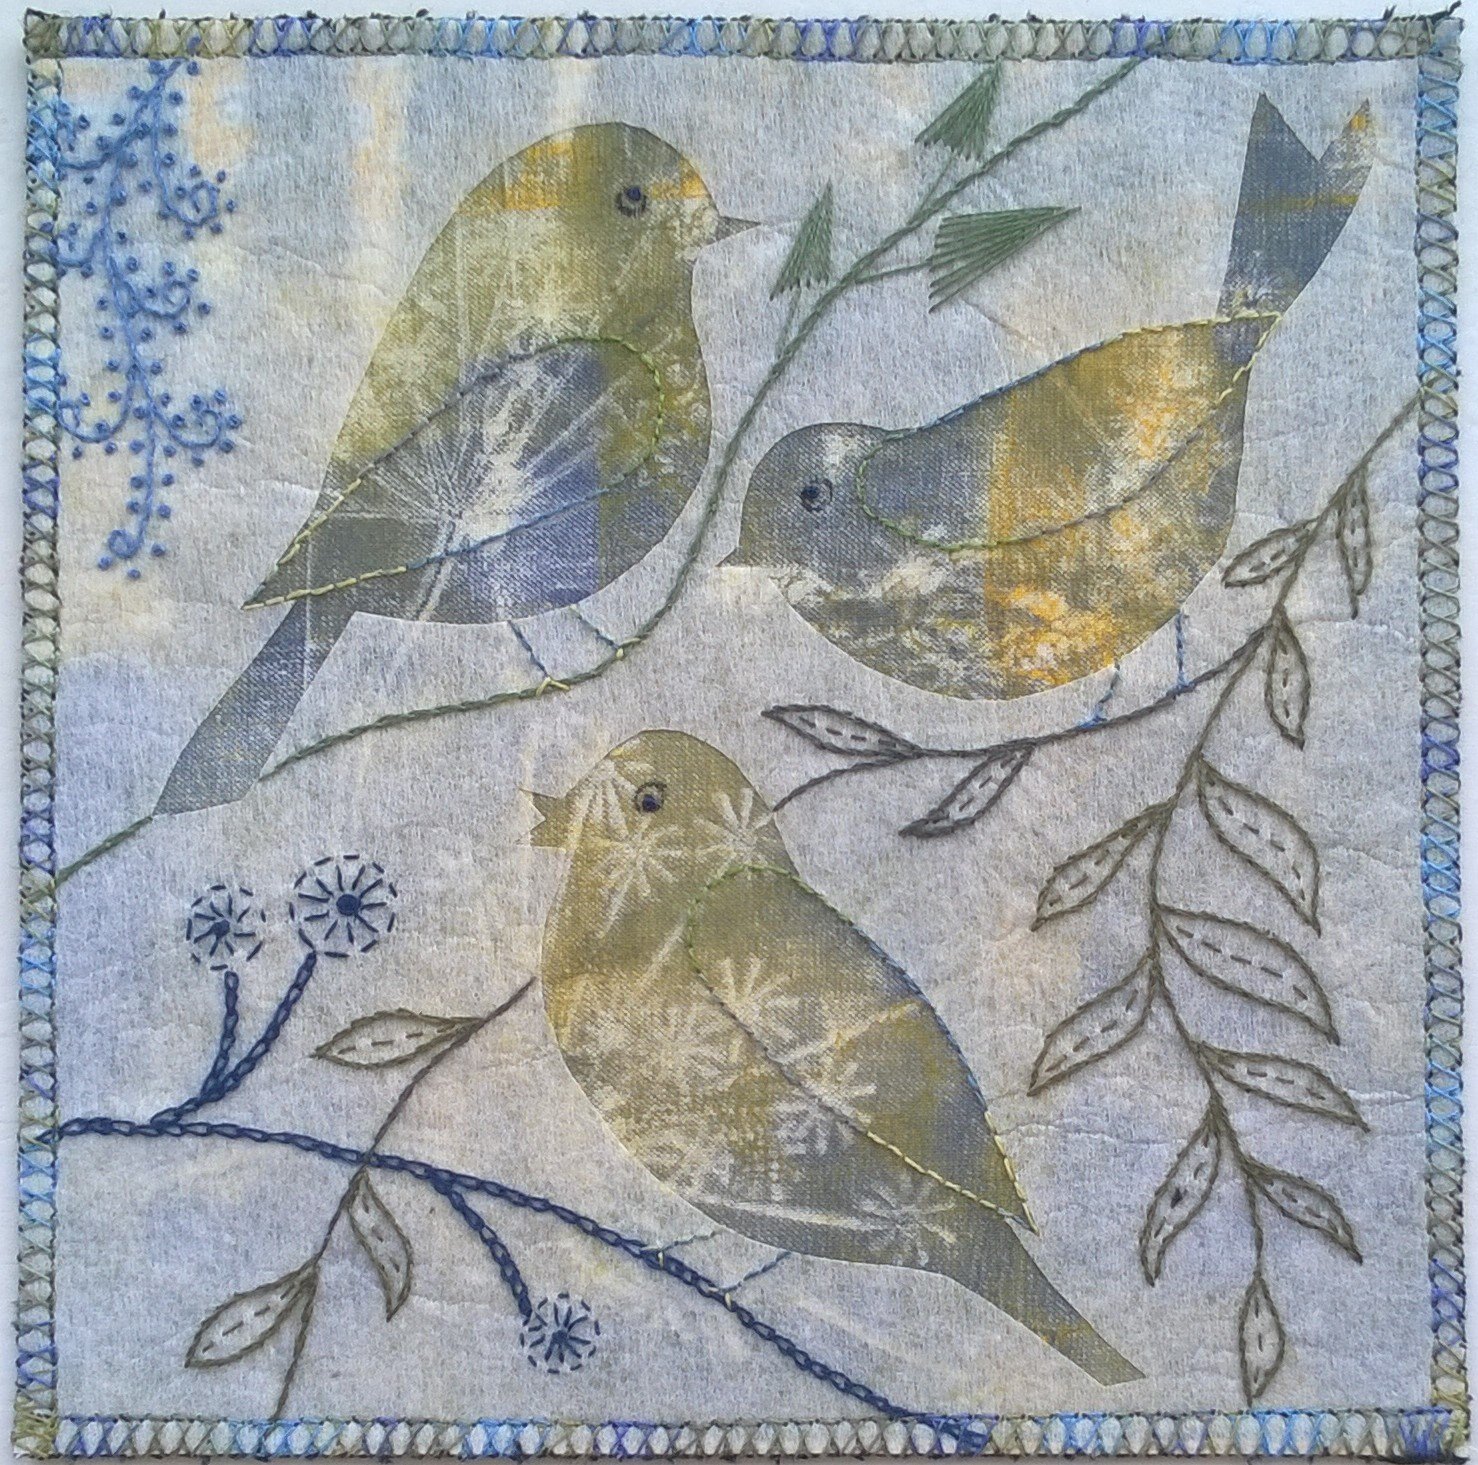 A Whiter Shade of Pale with Chris Yates, printing, stamping and sewing combined